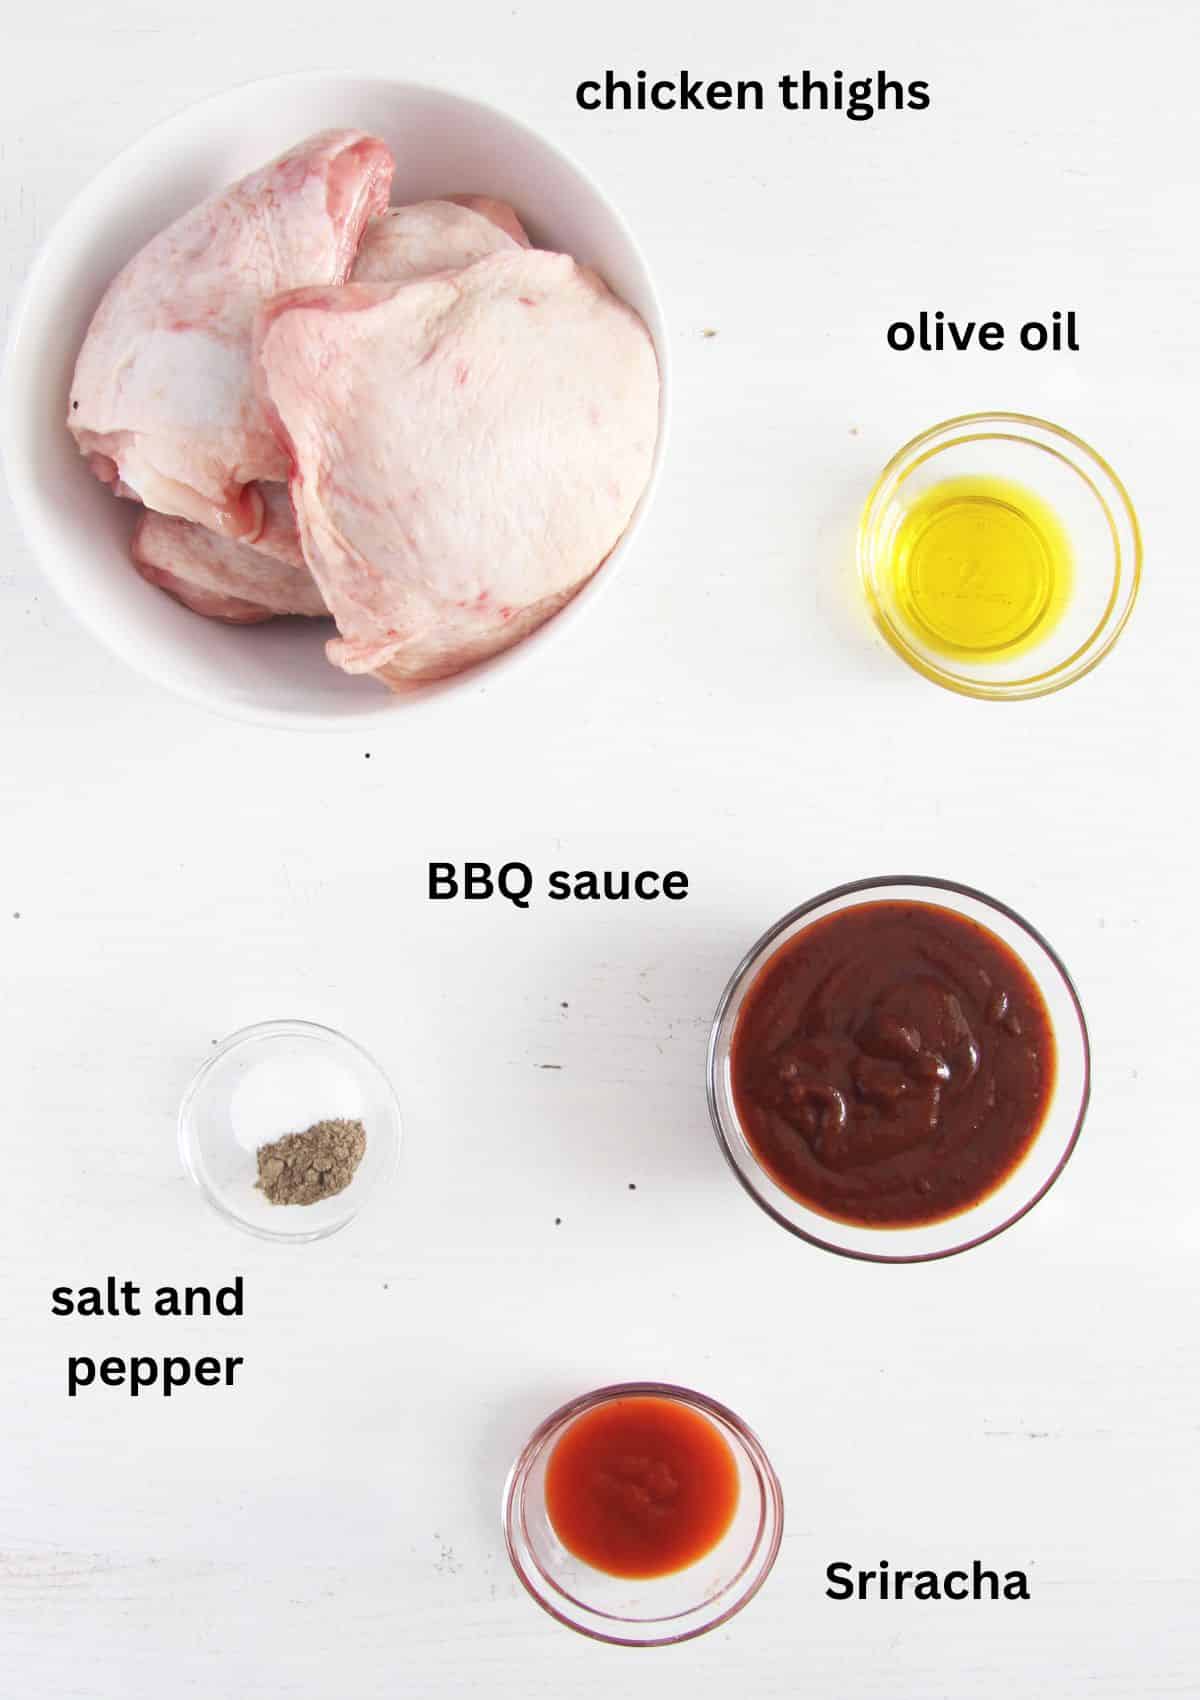 listed ingredients for making oven chicken legs with bbq sauce.